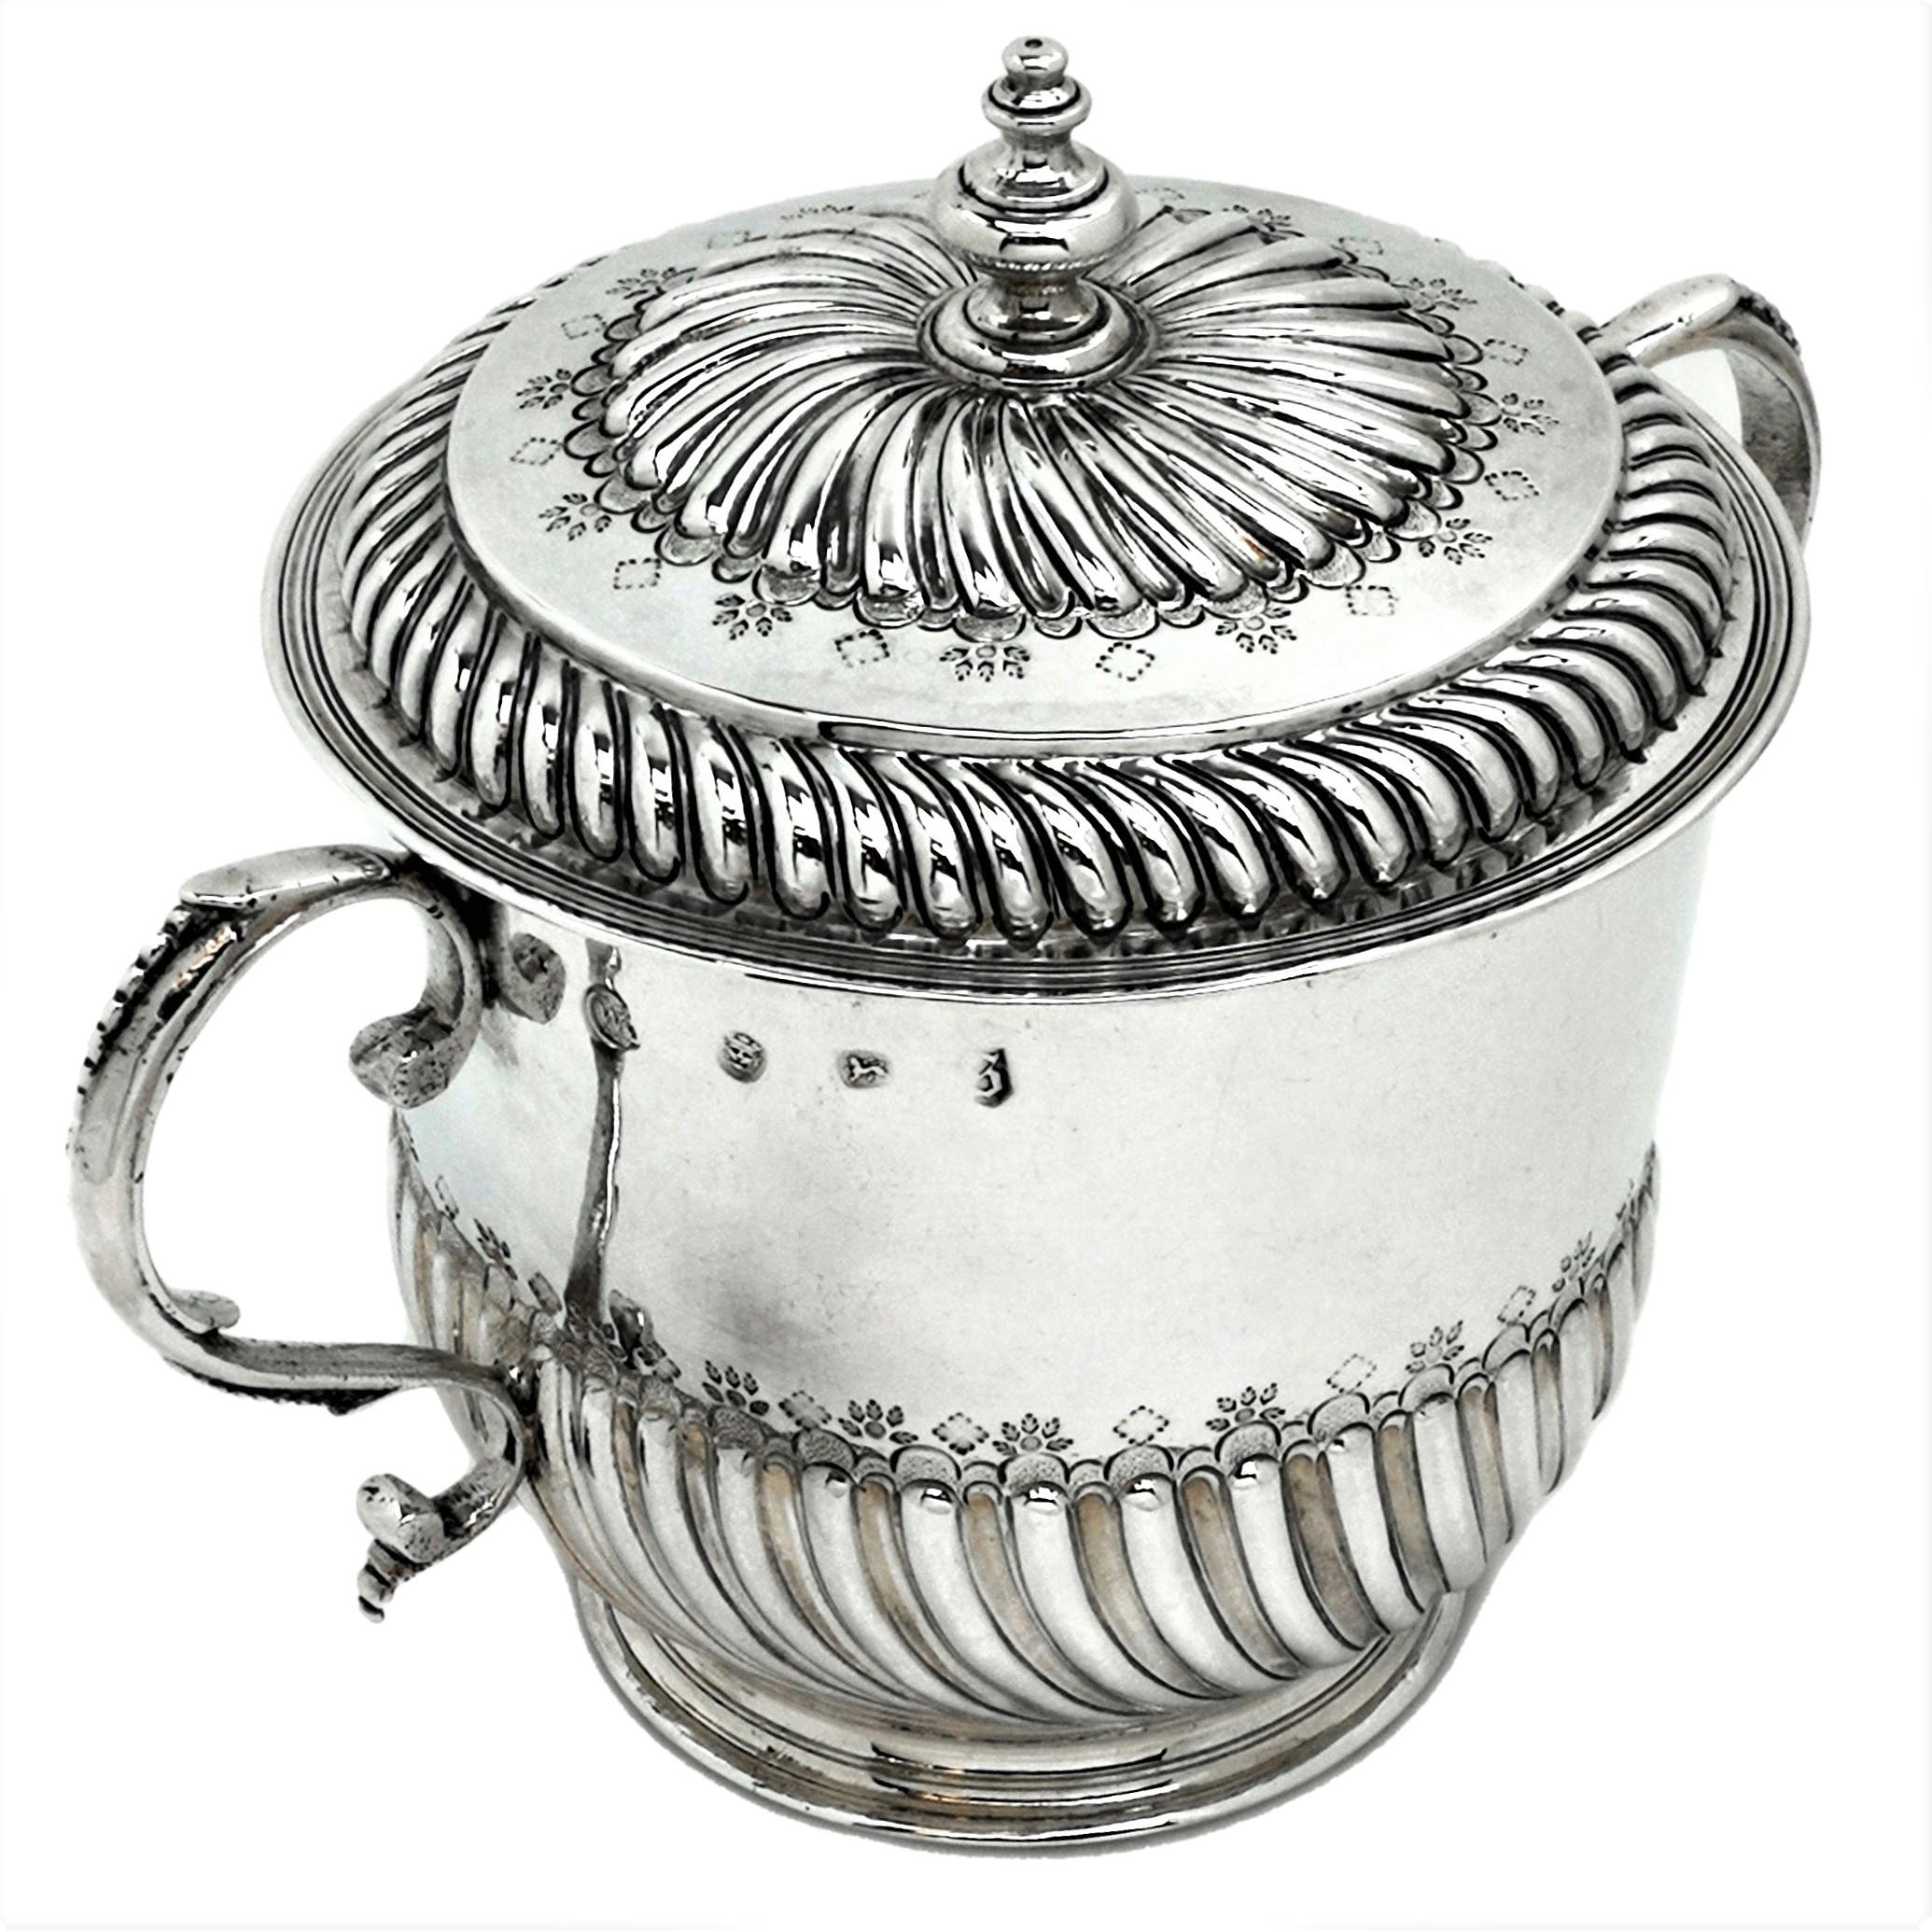 An early Antique William III solid Silver Porringer with fitted lid. This substantial Porringer has two scroll handles beaded embellishments. The body of the Porringer is decorated with a chased half fluted design and topped with an engraved